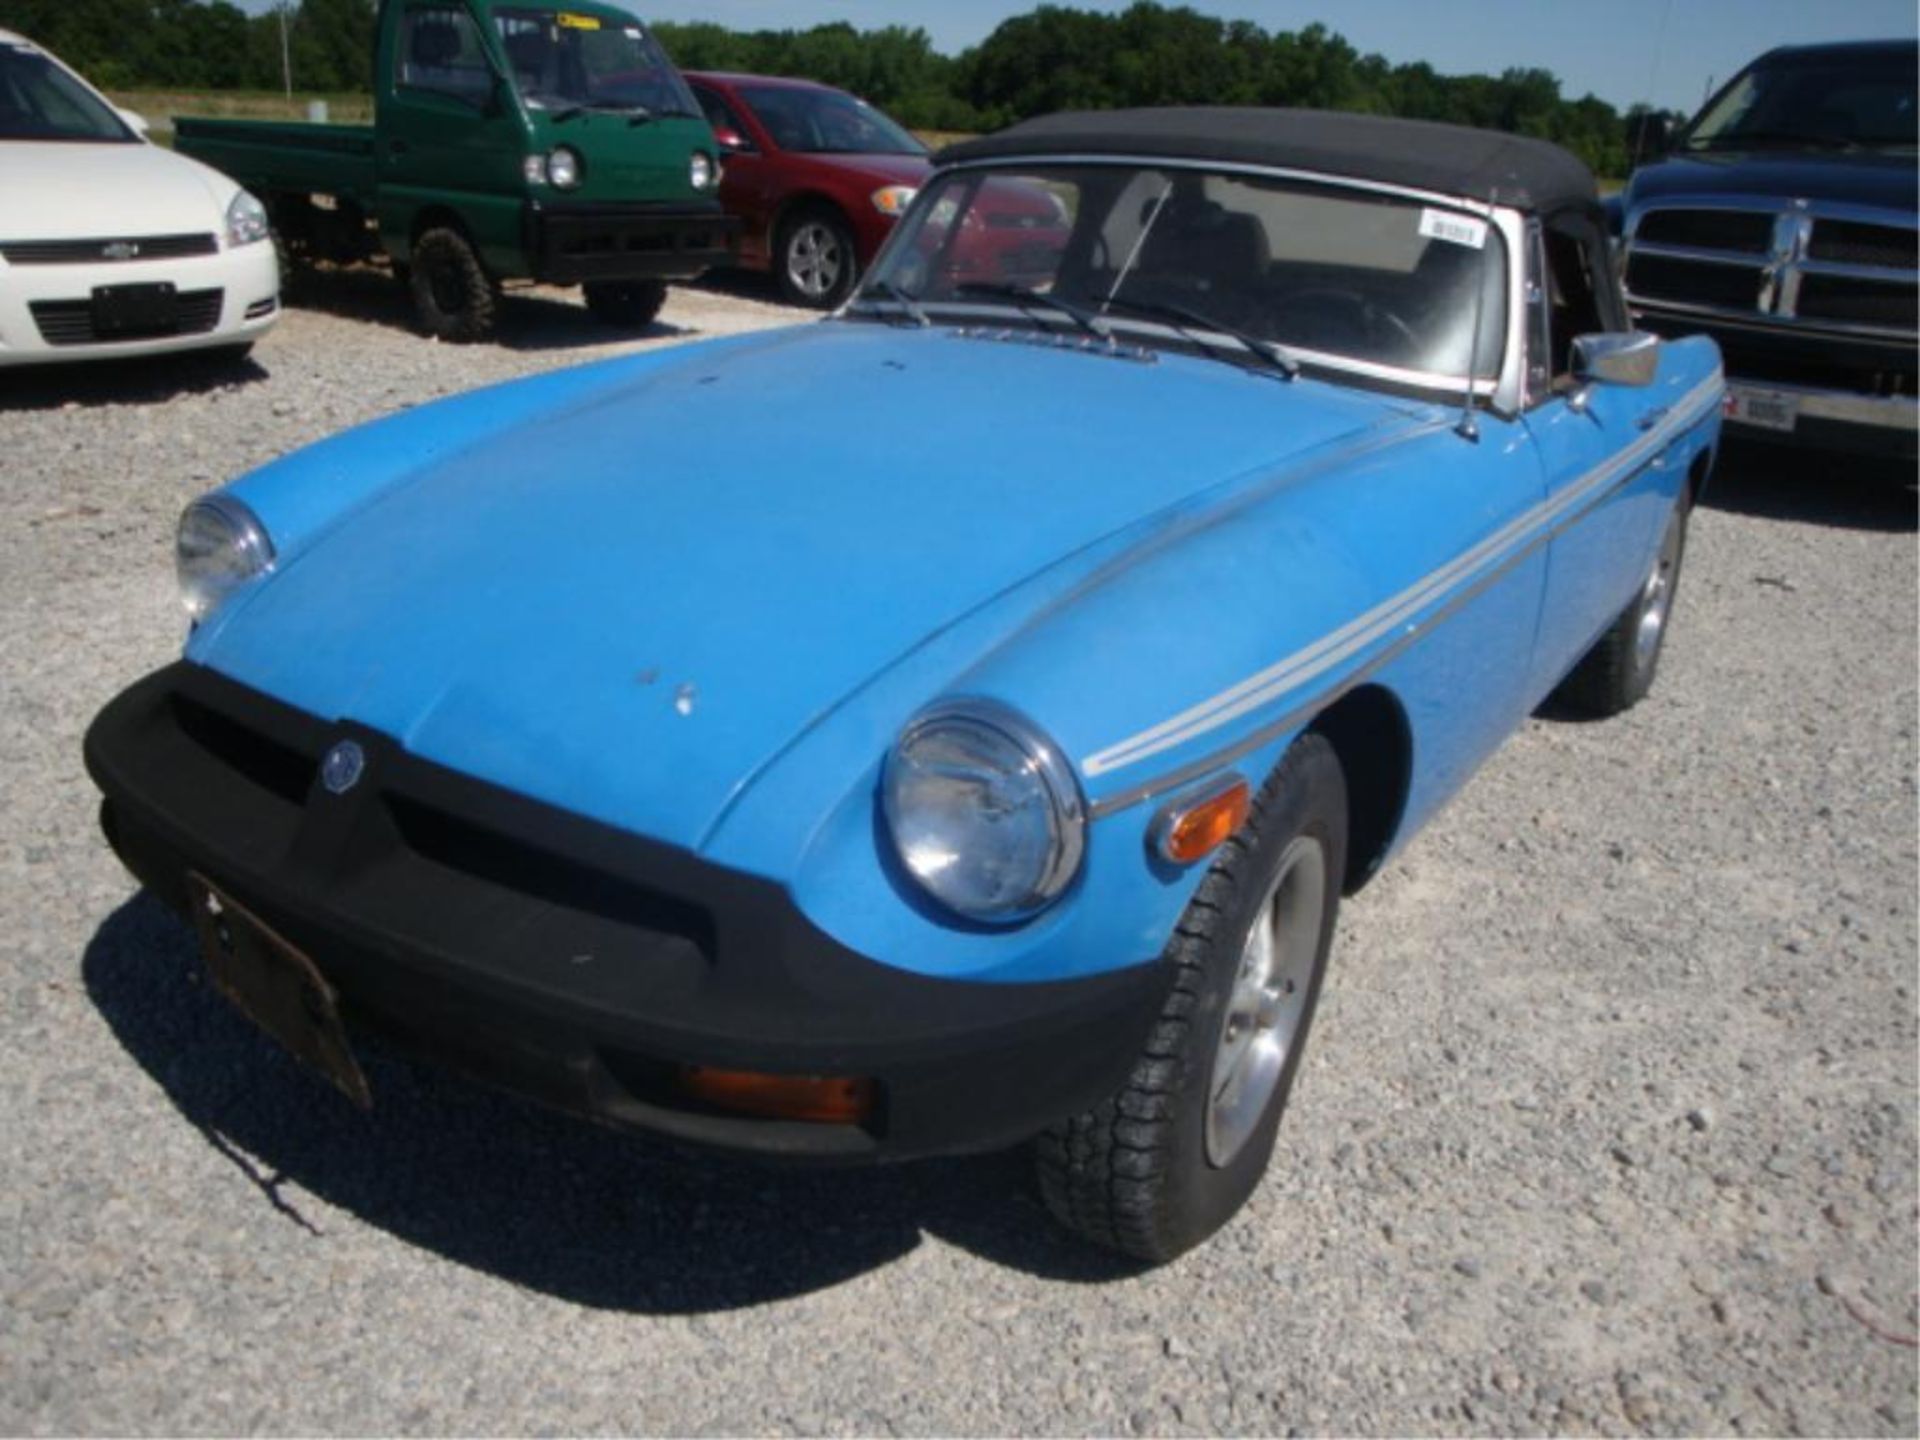 (Title) 1979 MGB, 14,890 miles on ODO,New in 2014: fuel pump, gas tank, clutch, radiator rodded - Image 4 of 34